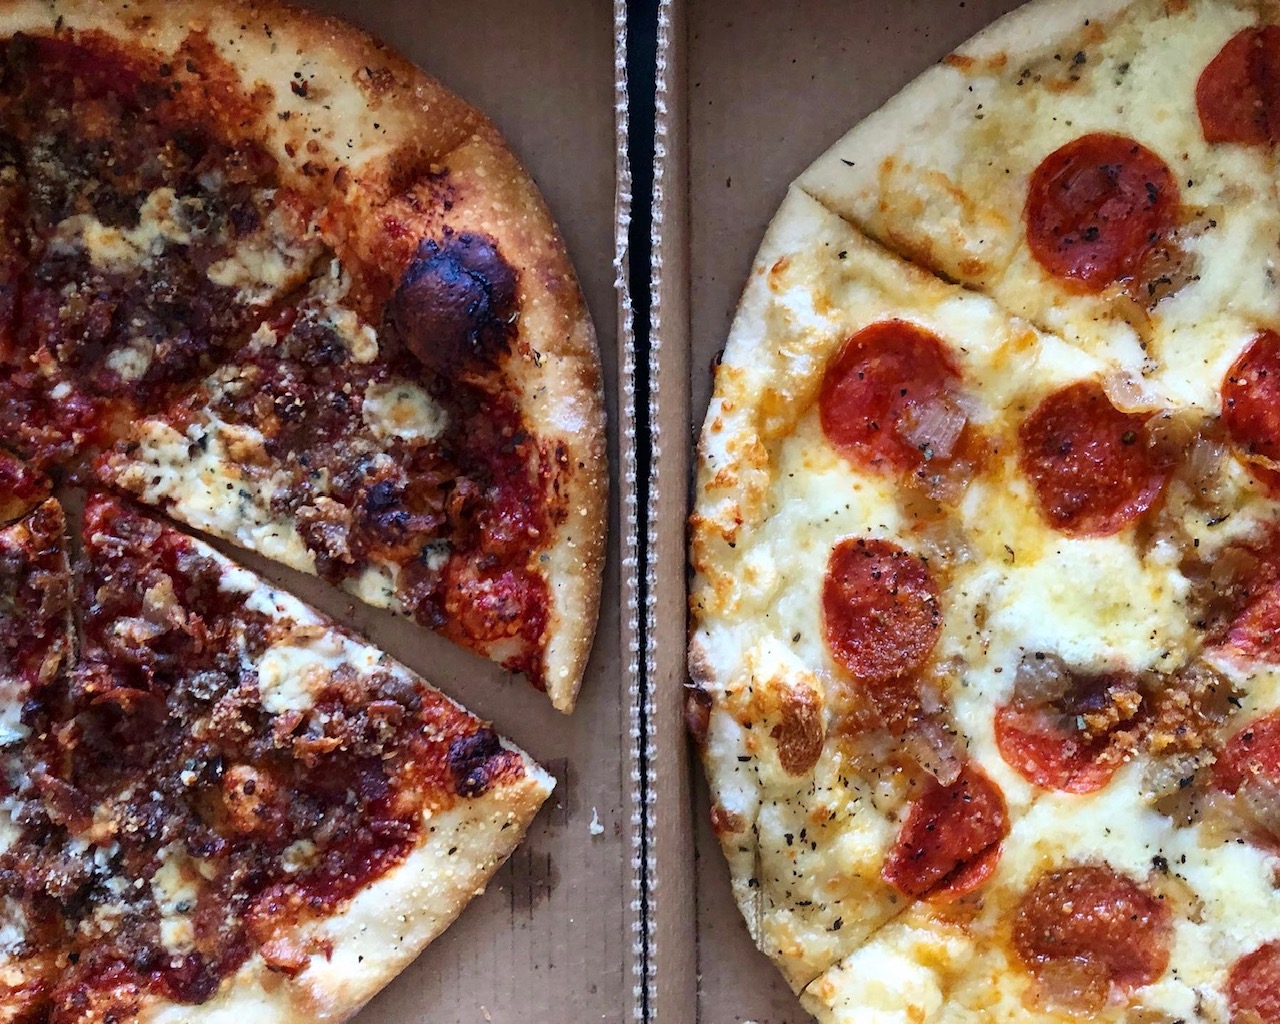 Two full pan pizzas are side by side. One has dark sauce and no cheese, and the other is pepperoni with lots of cheese. Photo by Alyssa Buckley.